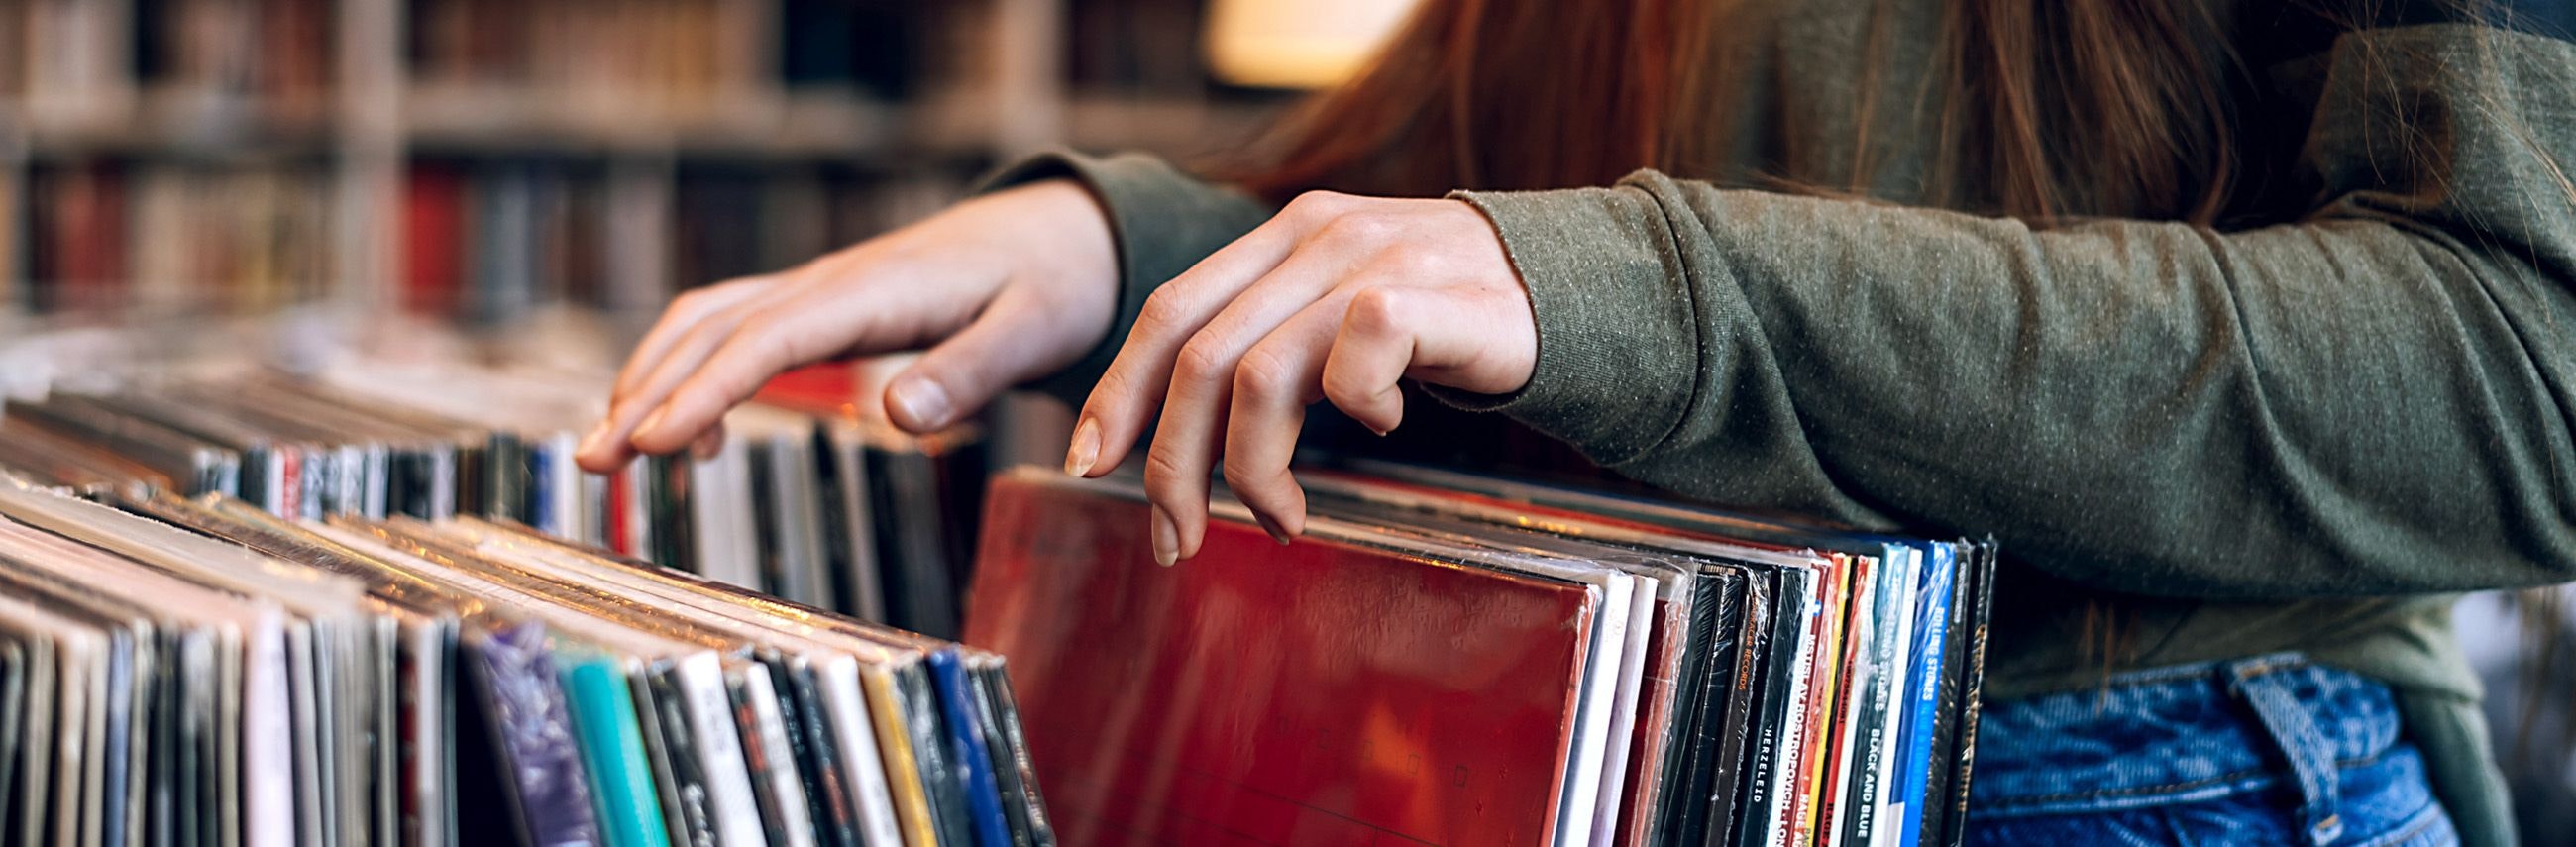 Woman's hands flipping through vinyl records in record shop.